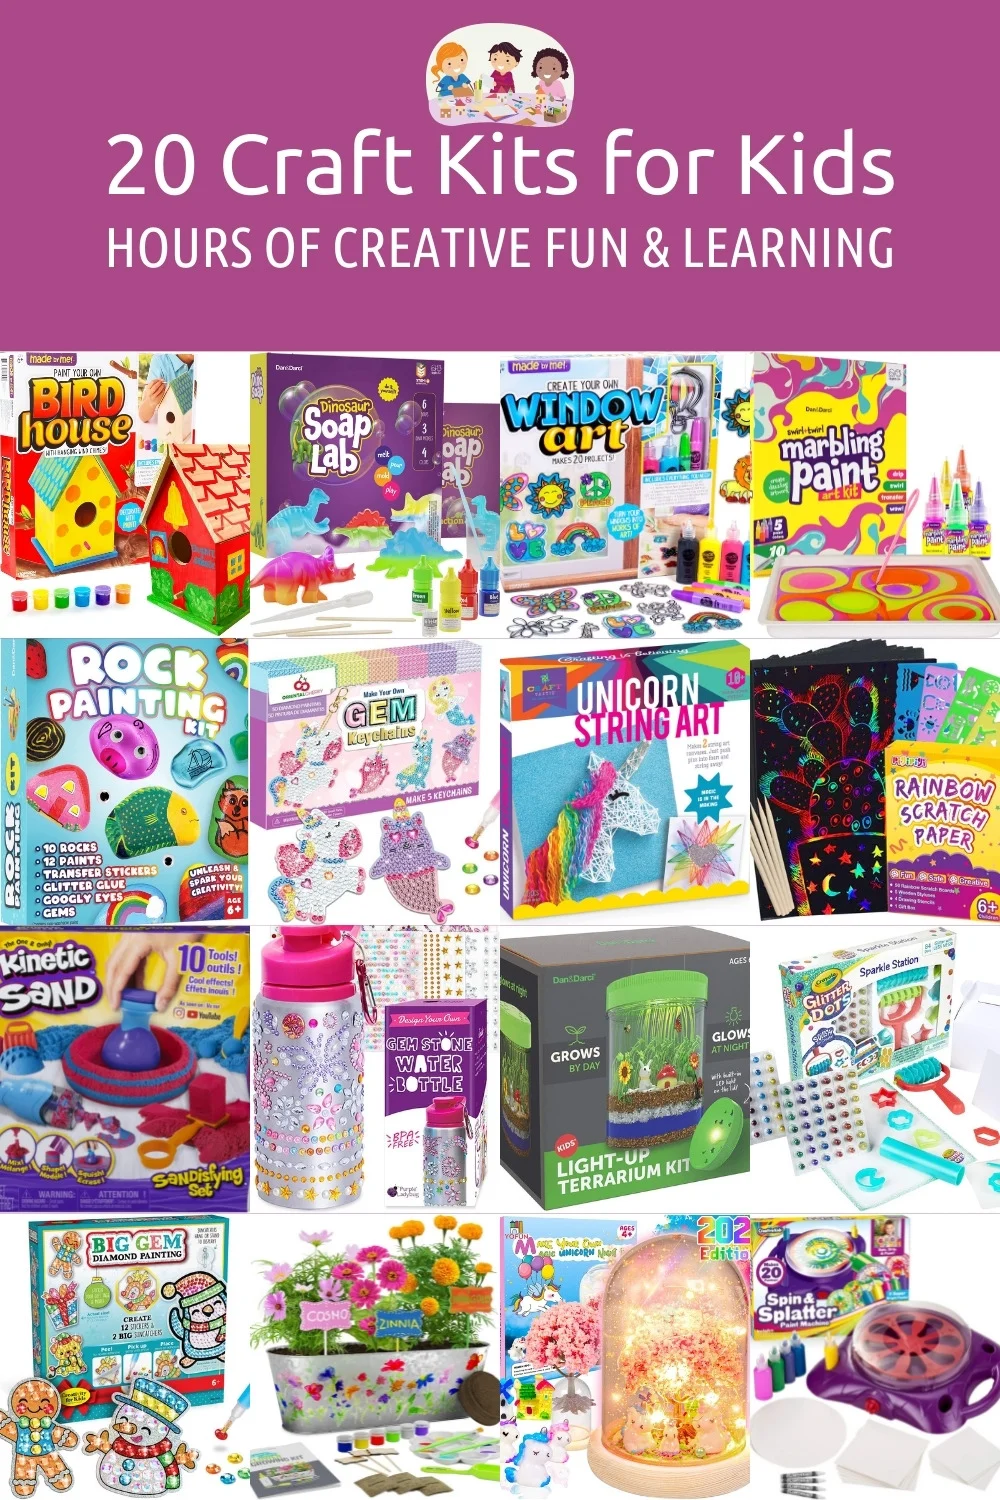 Craft Kits for Kids: The Best Way to Keep Kids Busy - DIY Candy